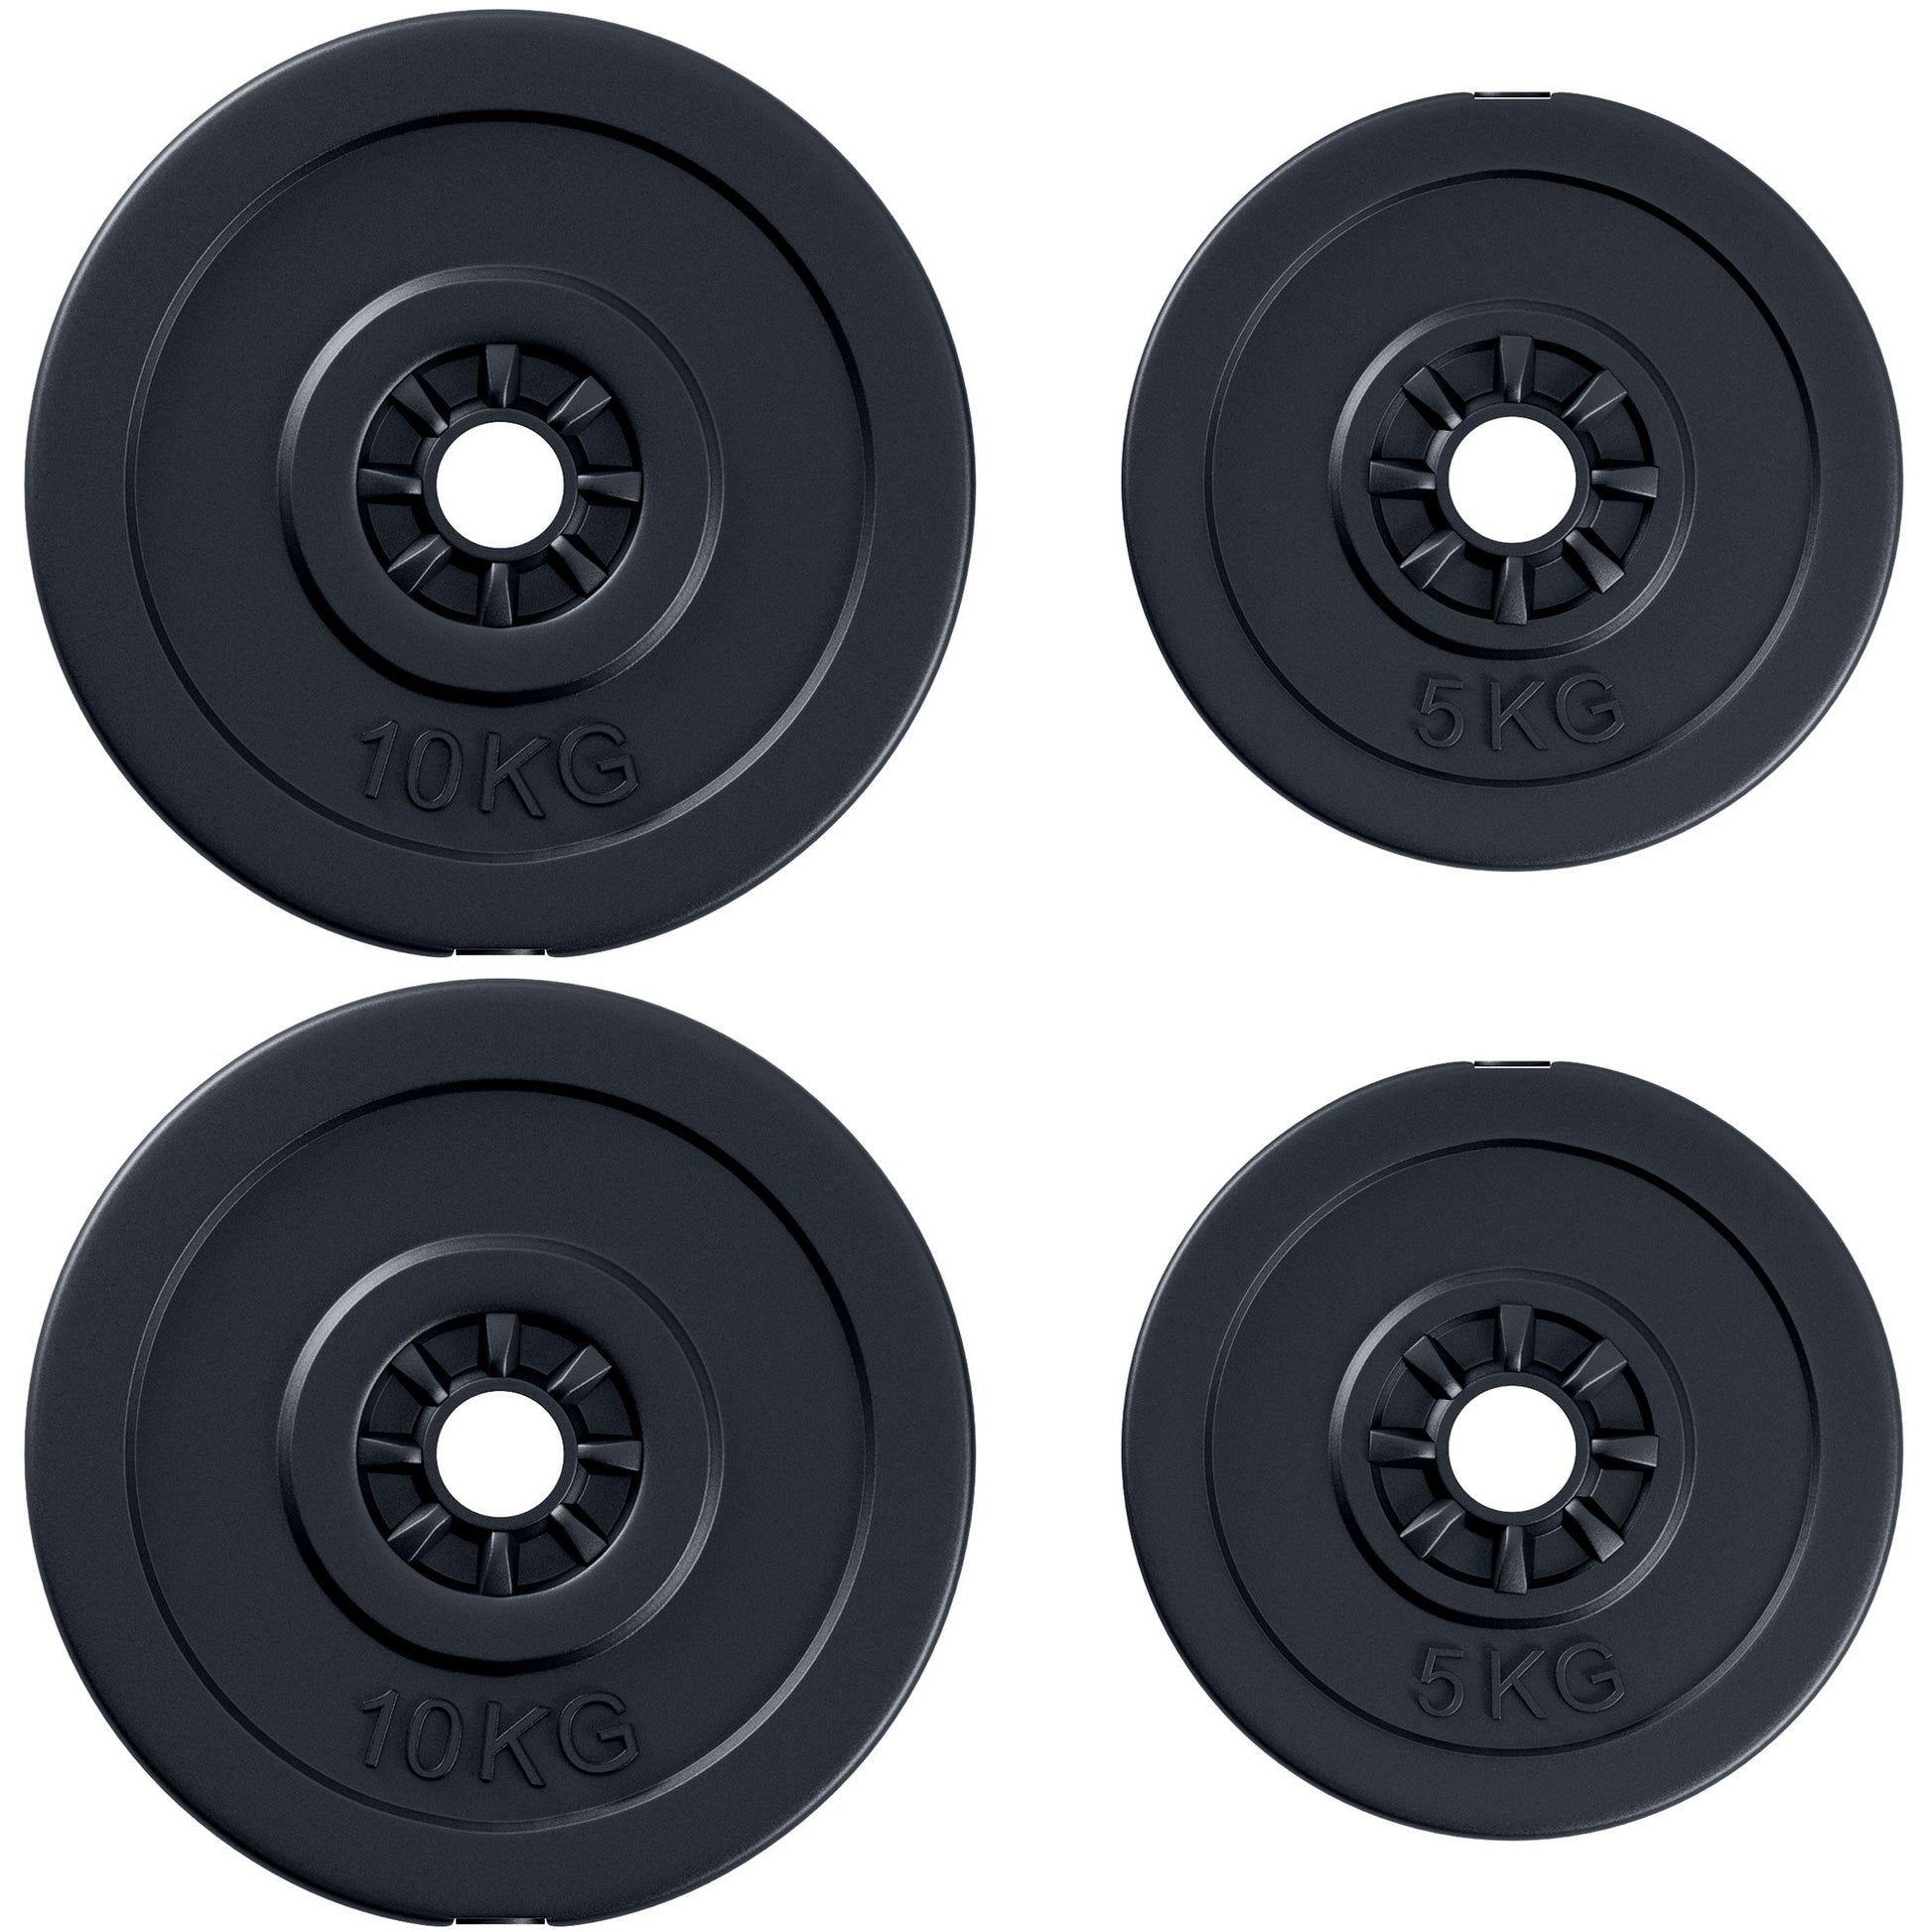 4 Piece dumbbell Weight Plates Set 2 x 11lbs and 2 x 22lbs Black (Weights Only) at Gallery Canada